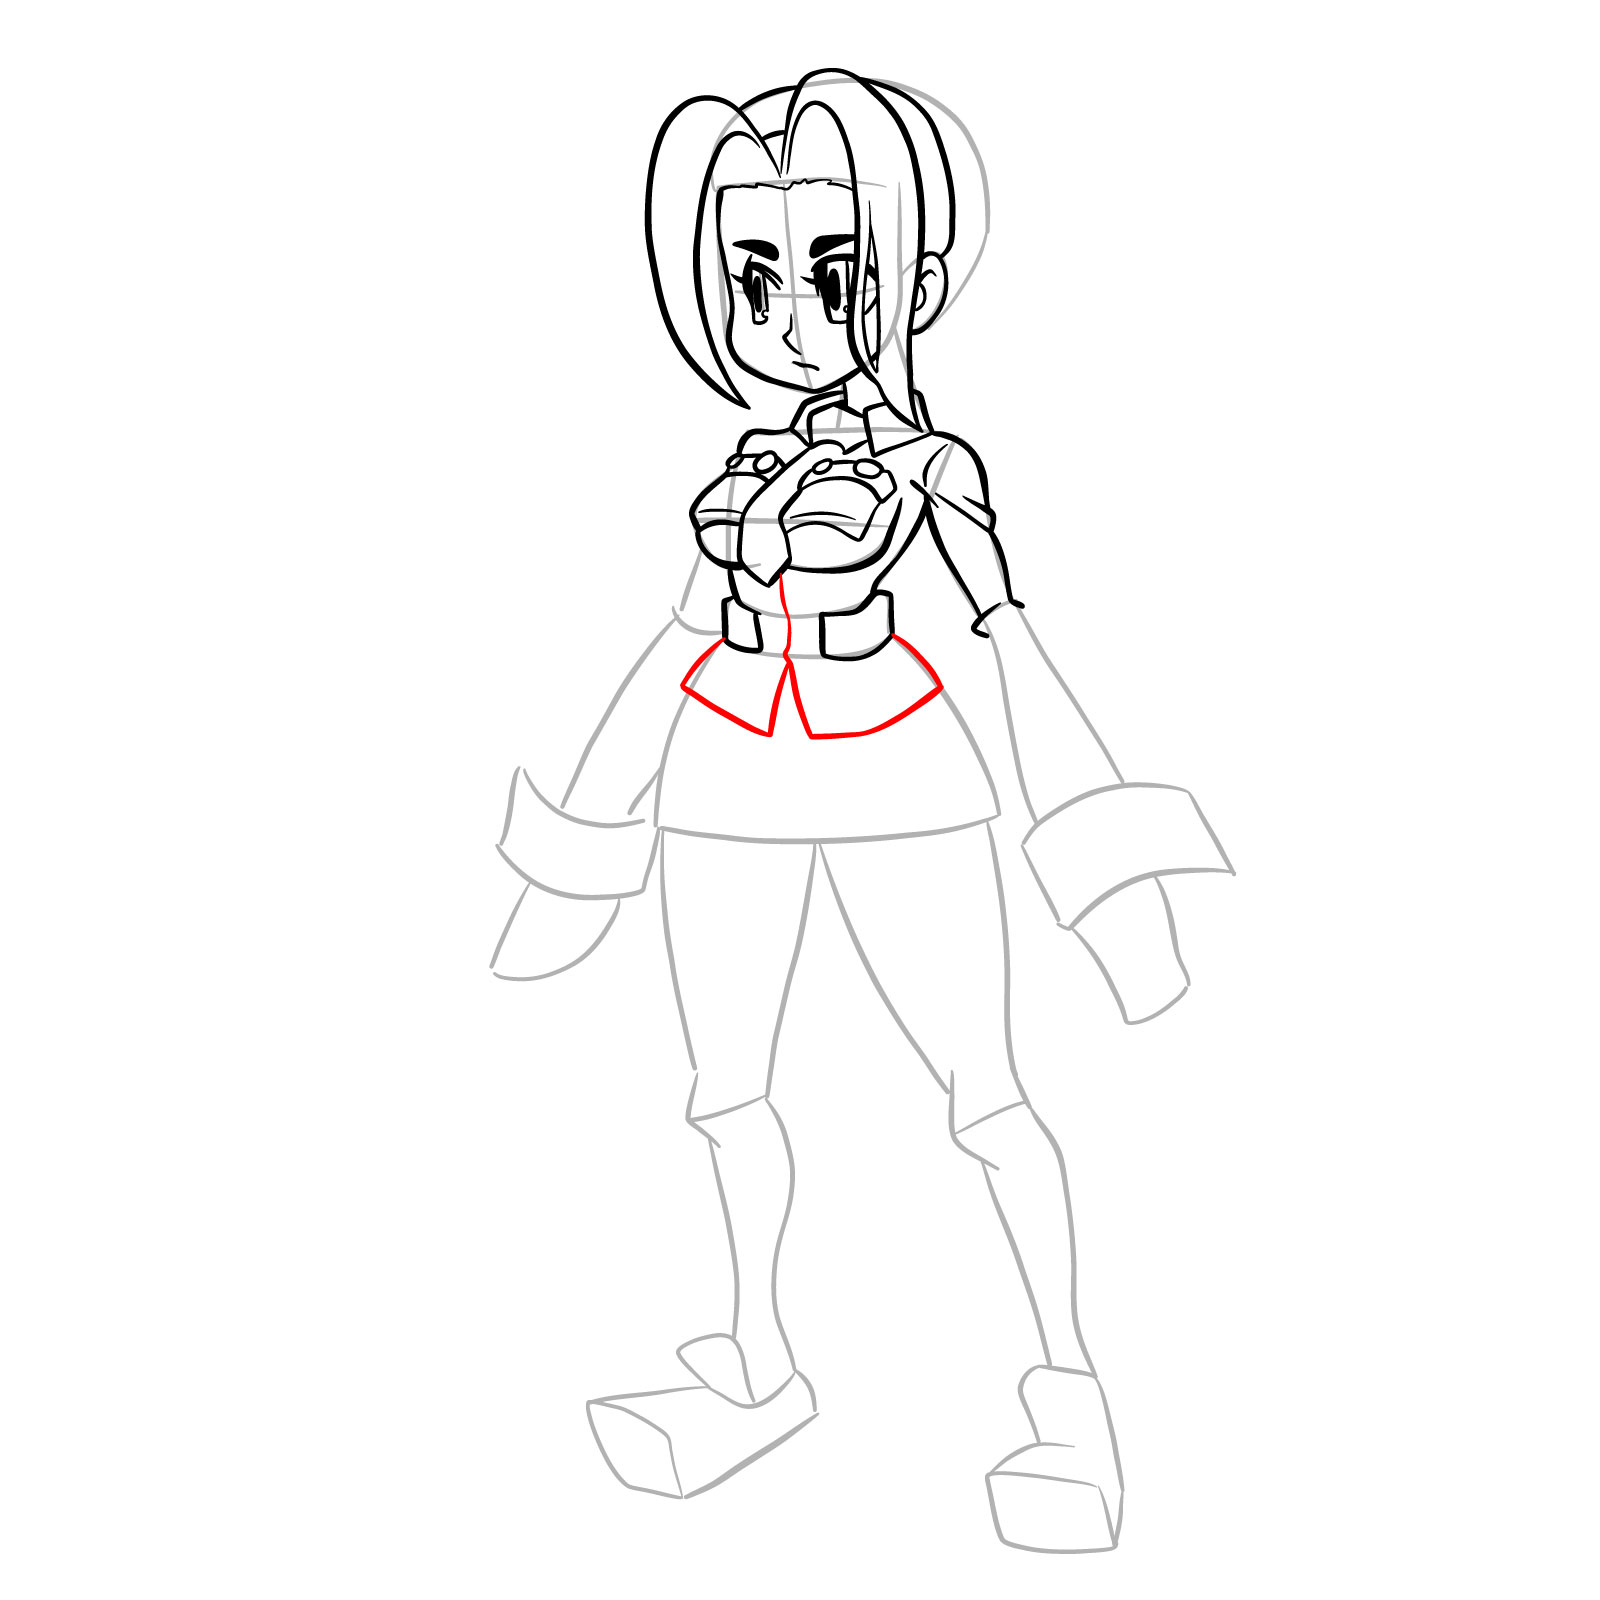 How to draw Filia from Skullgirls - step 22